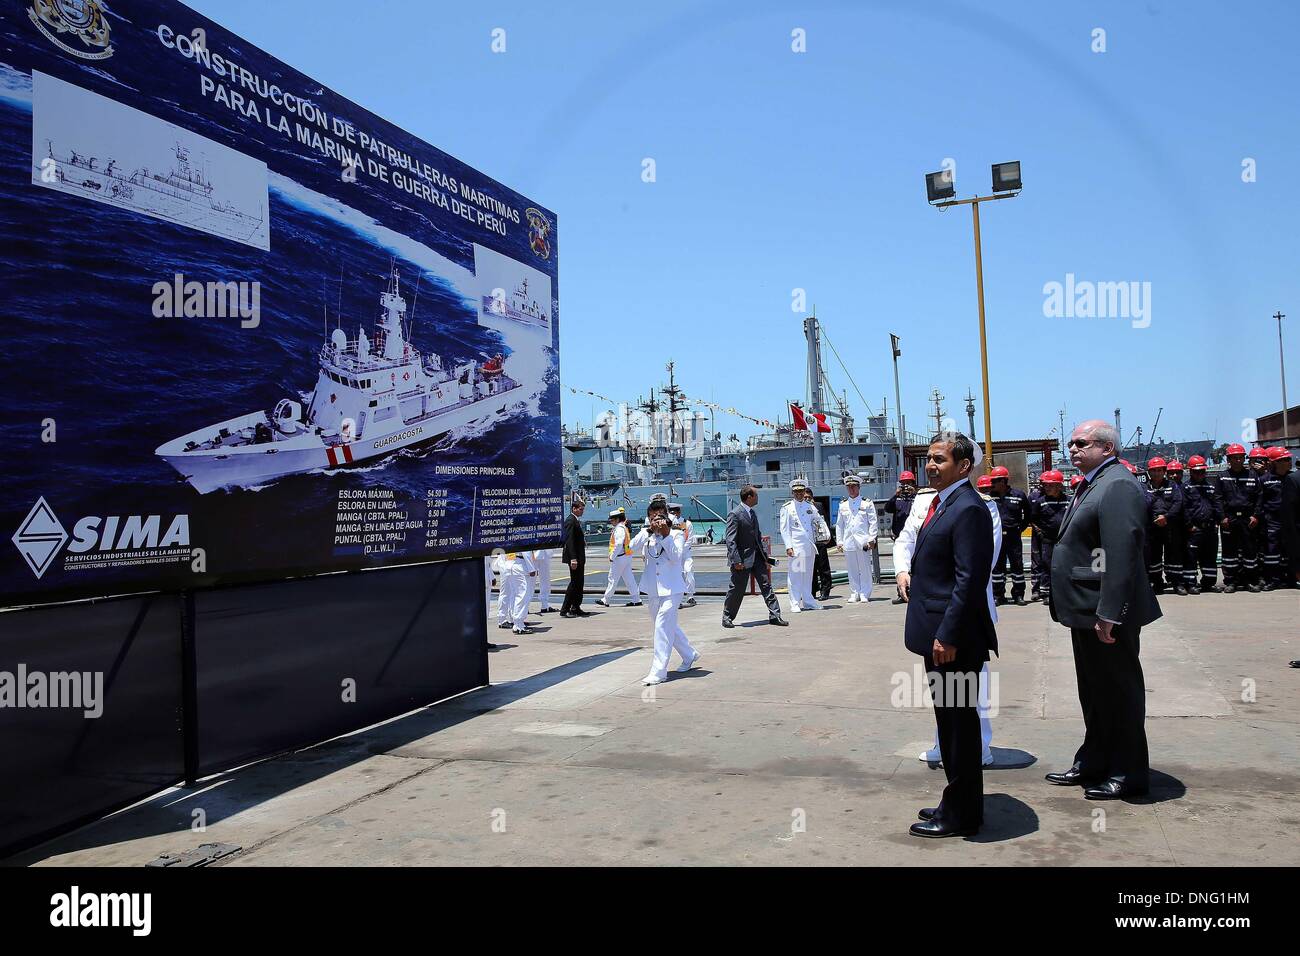 Callao, Peru. 26th Dec, 2013. Image provided by Peru's Presidency shows Peruvian President Ollanta Humala (L, front) observing an image of the ship that will be built by the Navy's Industrial Services (SIMA, for its acronym in Spanish), along Defense Minister, Pedro Cateriano (R, front), in Callao, Peru, on Dec. 26, 2013. Credit:  Peru's Presidency/Xinhua/Alamy Live News Stock Photo